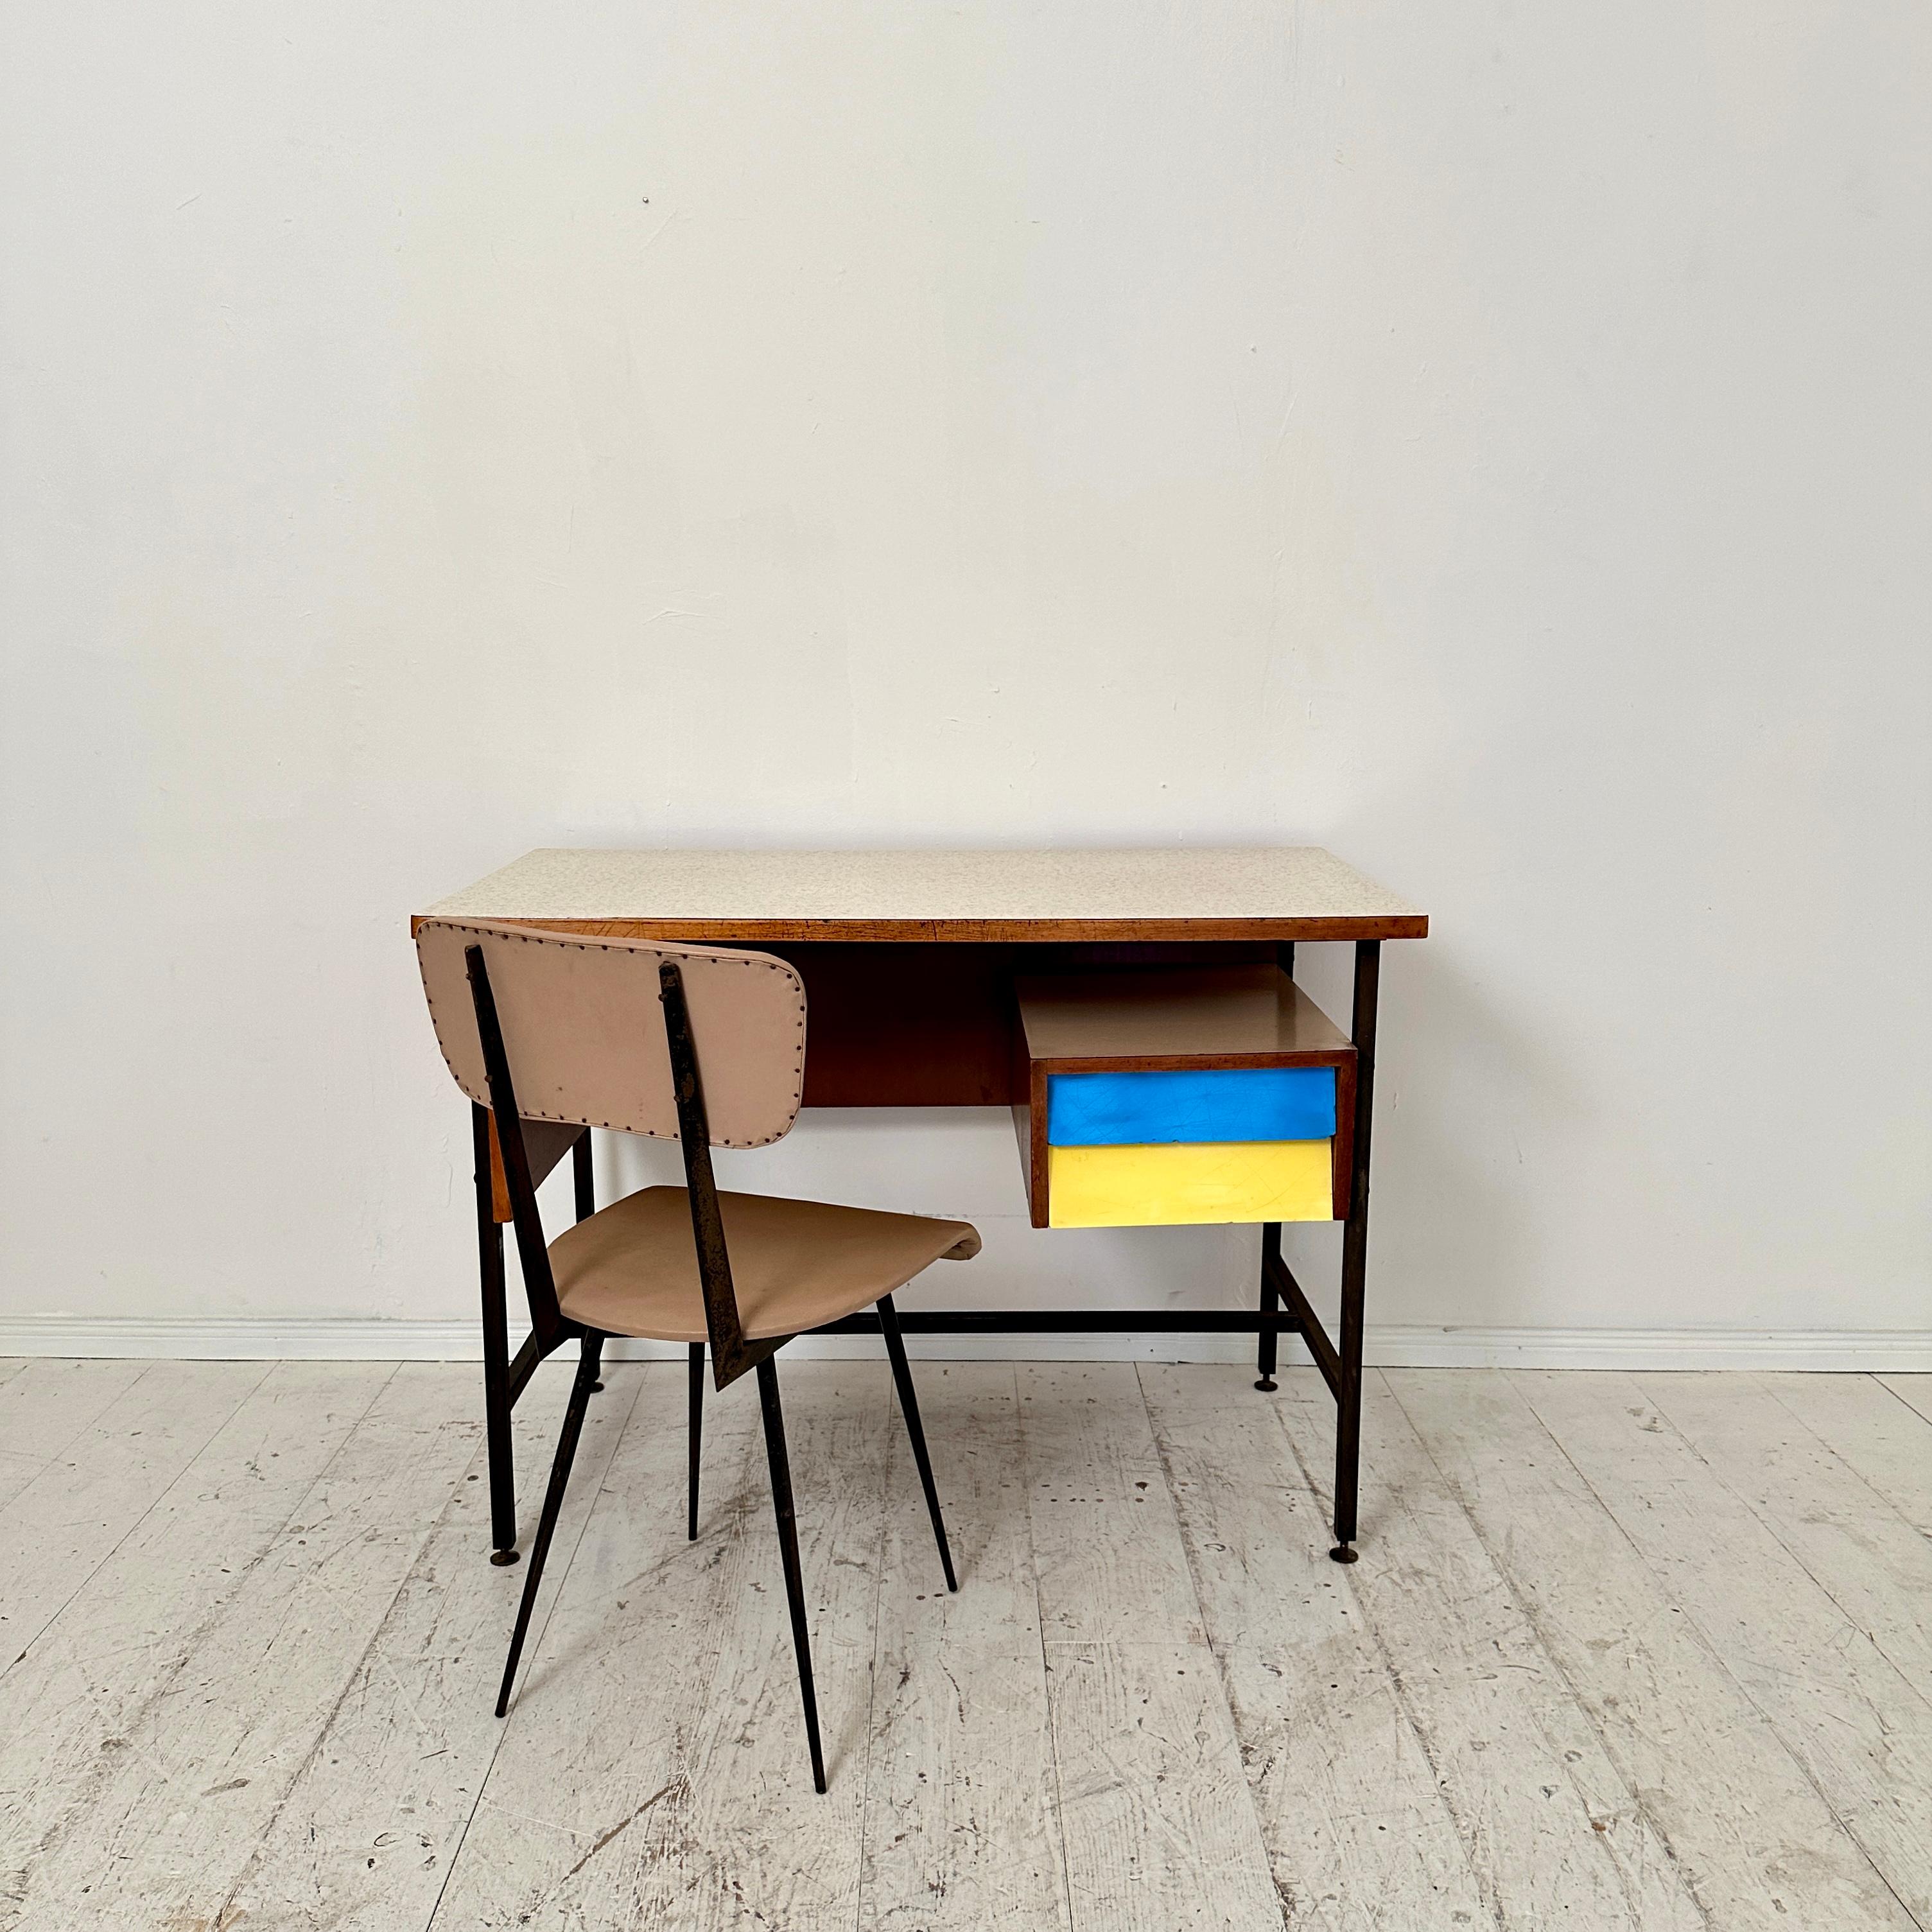 Small Mid Century Italian Desk in Metal, Walnut and Formica, around 1950 In Good Condition For Sale In Berlin, DE